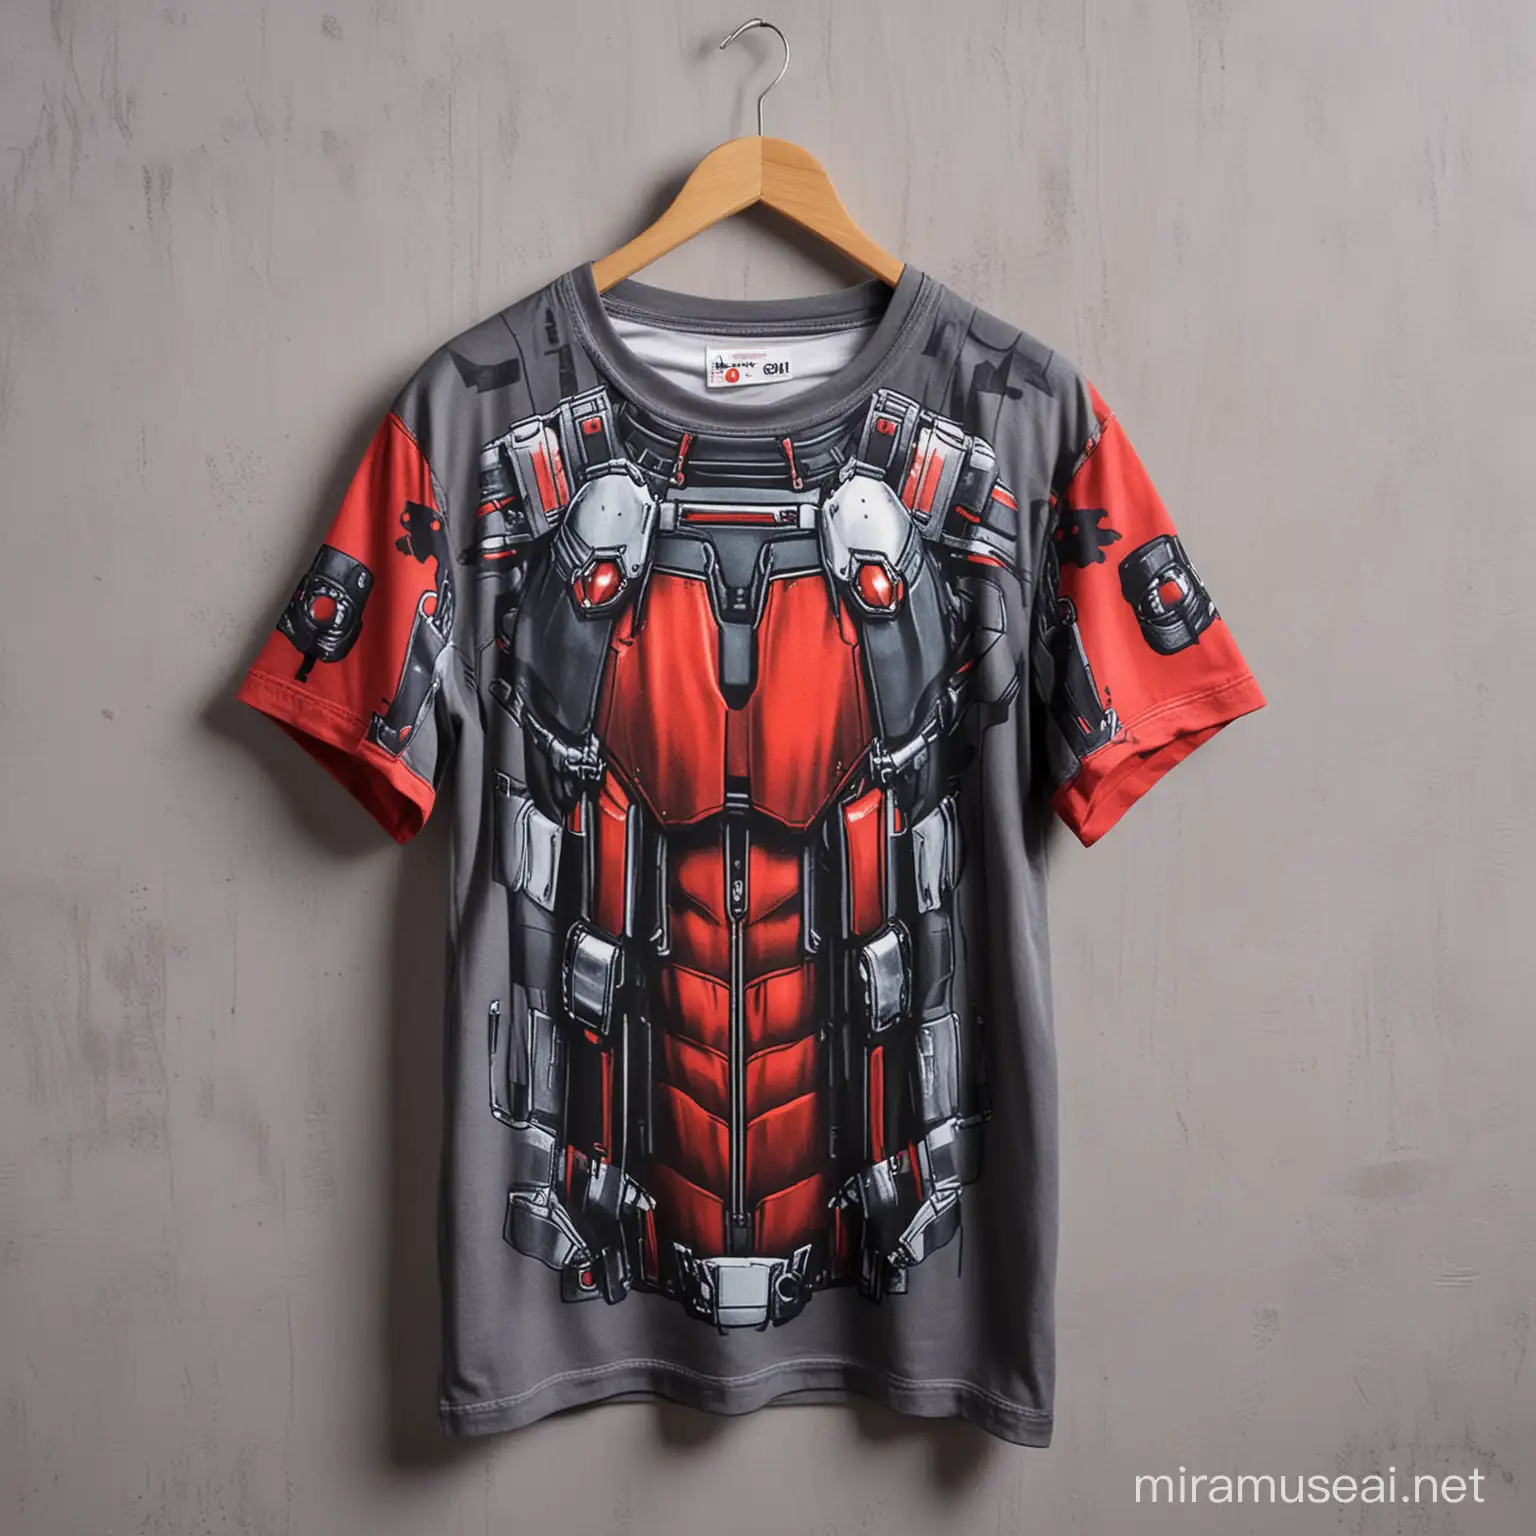 Ant Man Pattern Tshirt Hanging in a Creative Display